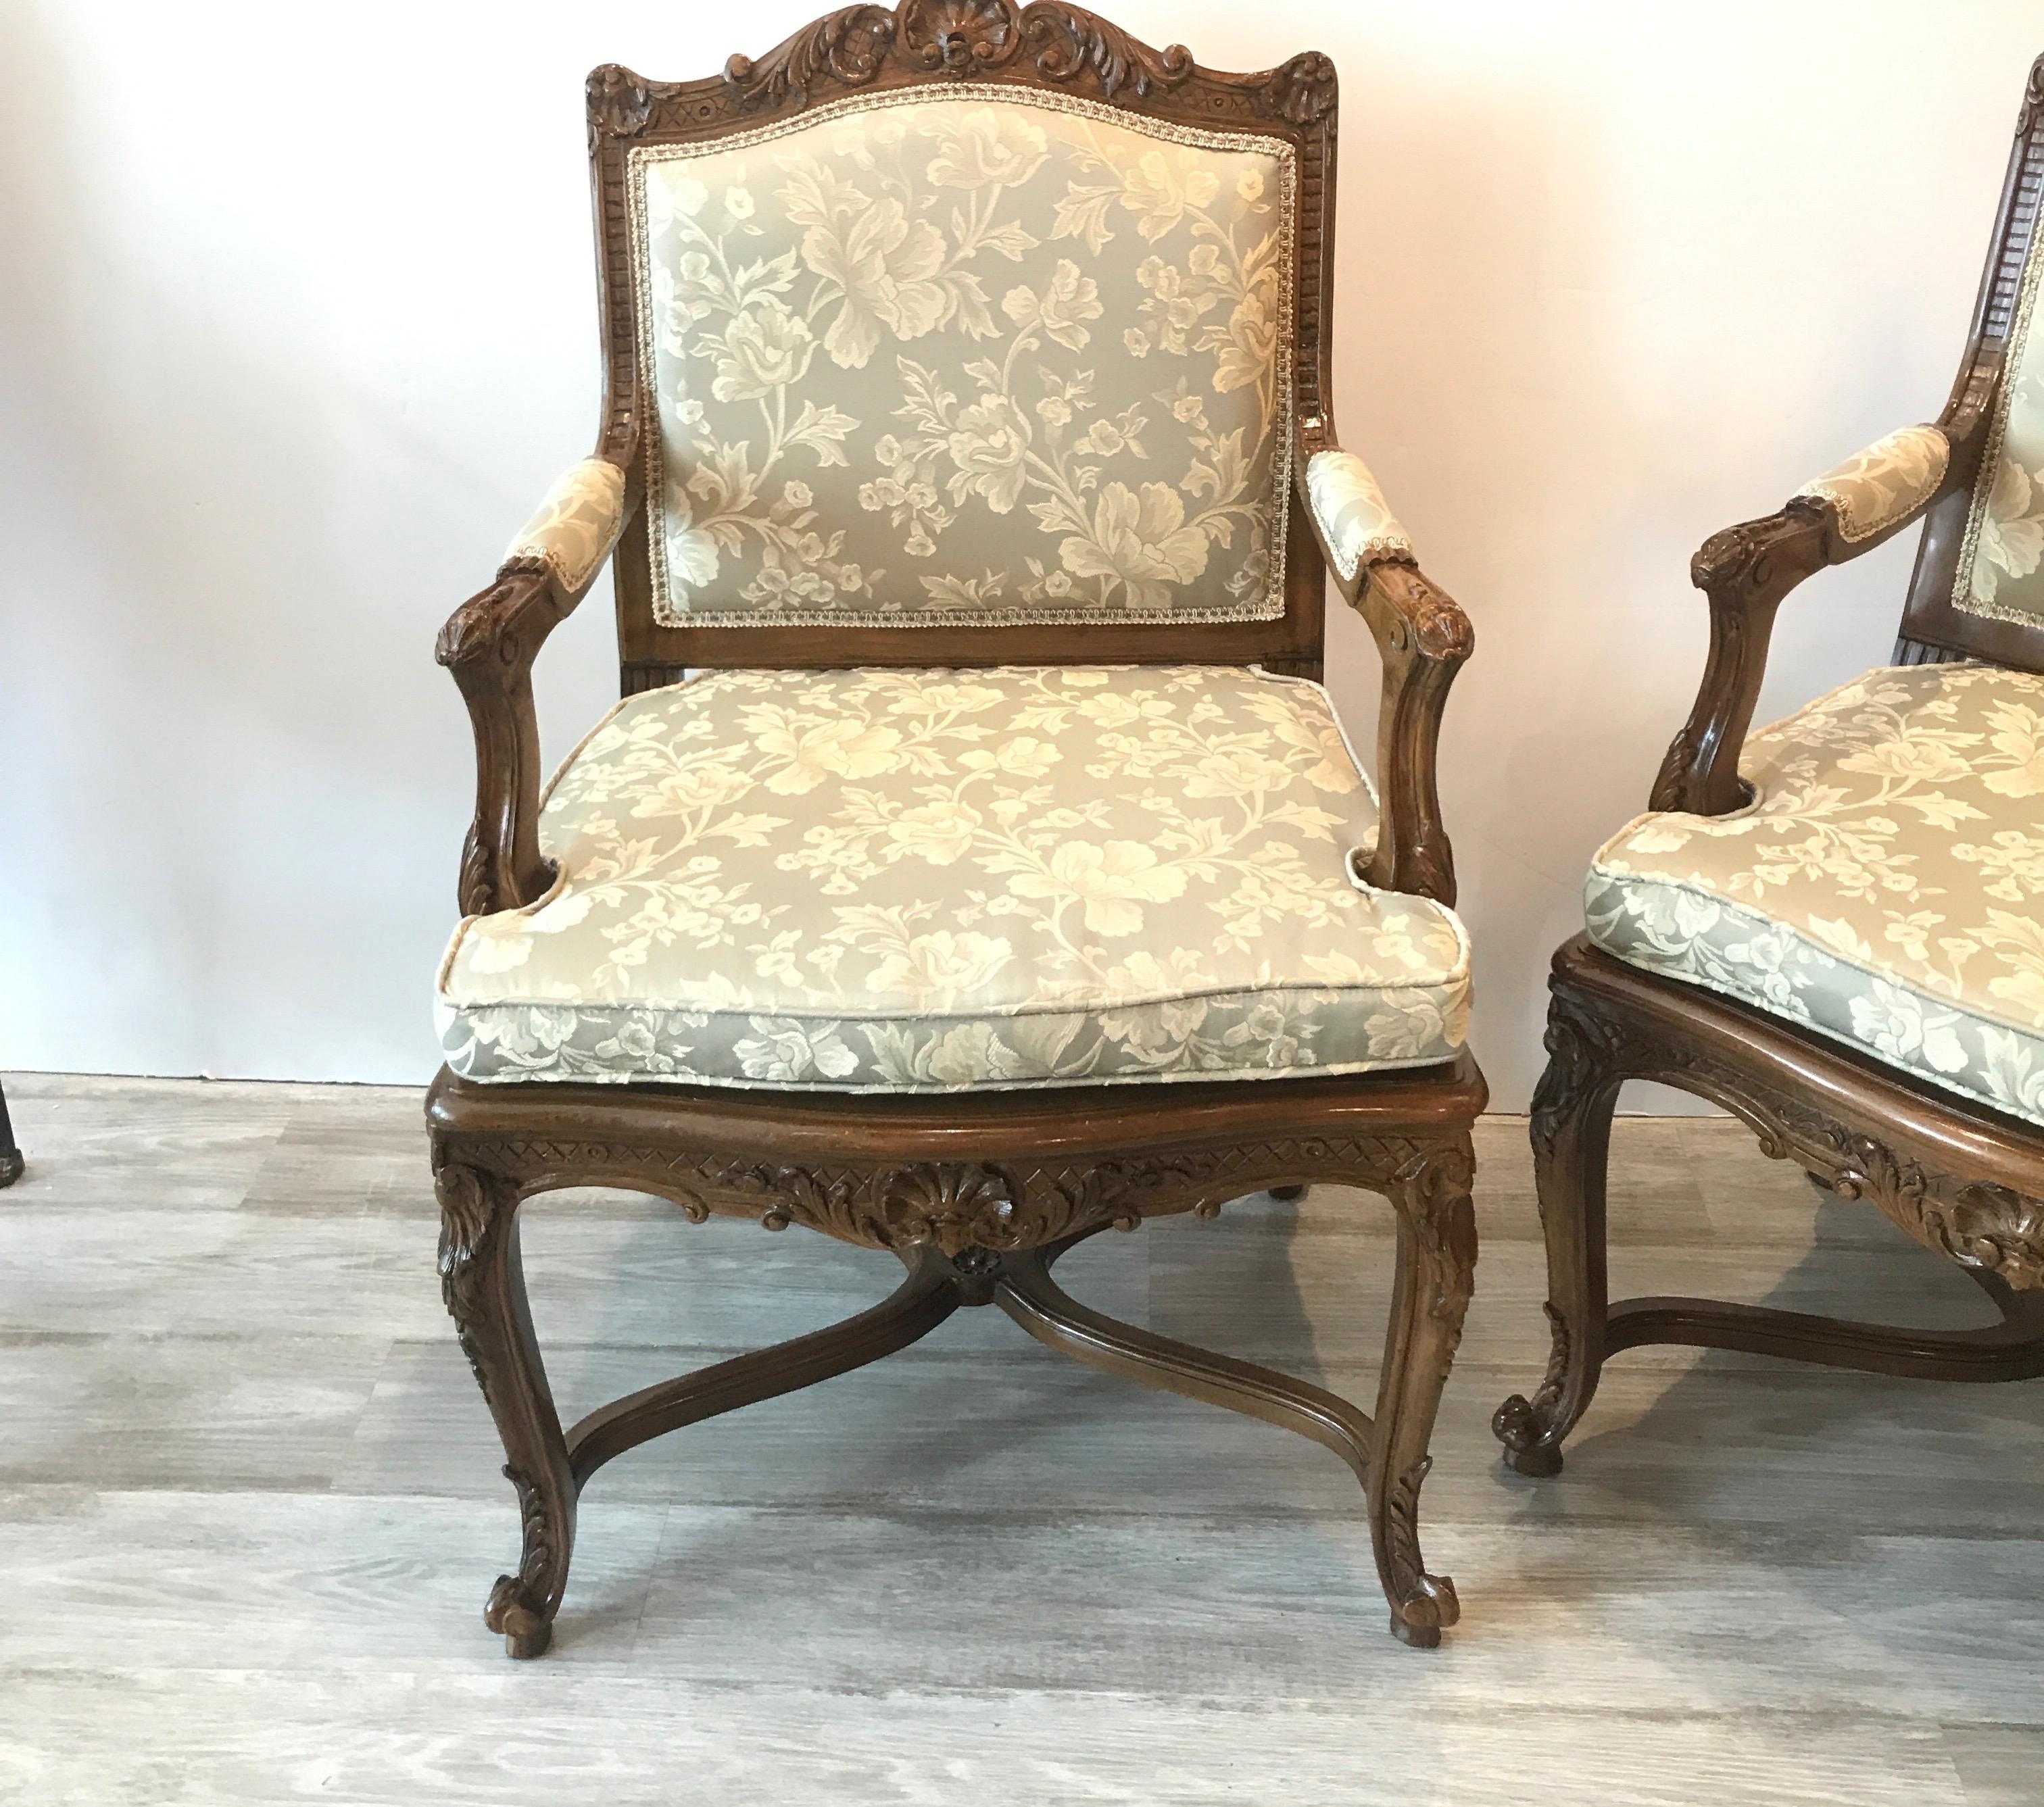 A pair of hand carve walnut framed open armchairs with new fabric. The frames with hand carved detailing all-over with new light sage damask fabric. Beautiful warm dark wood with clean smooth finish..
Measures: 25 wide, 38 high 24 deep 20 seat...